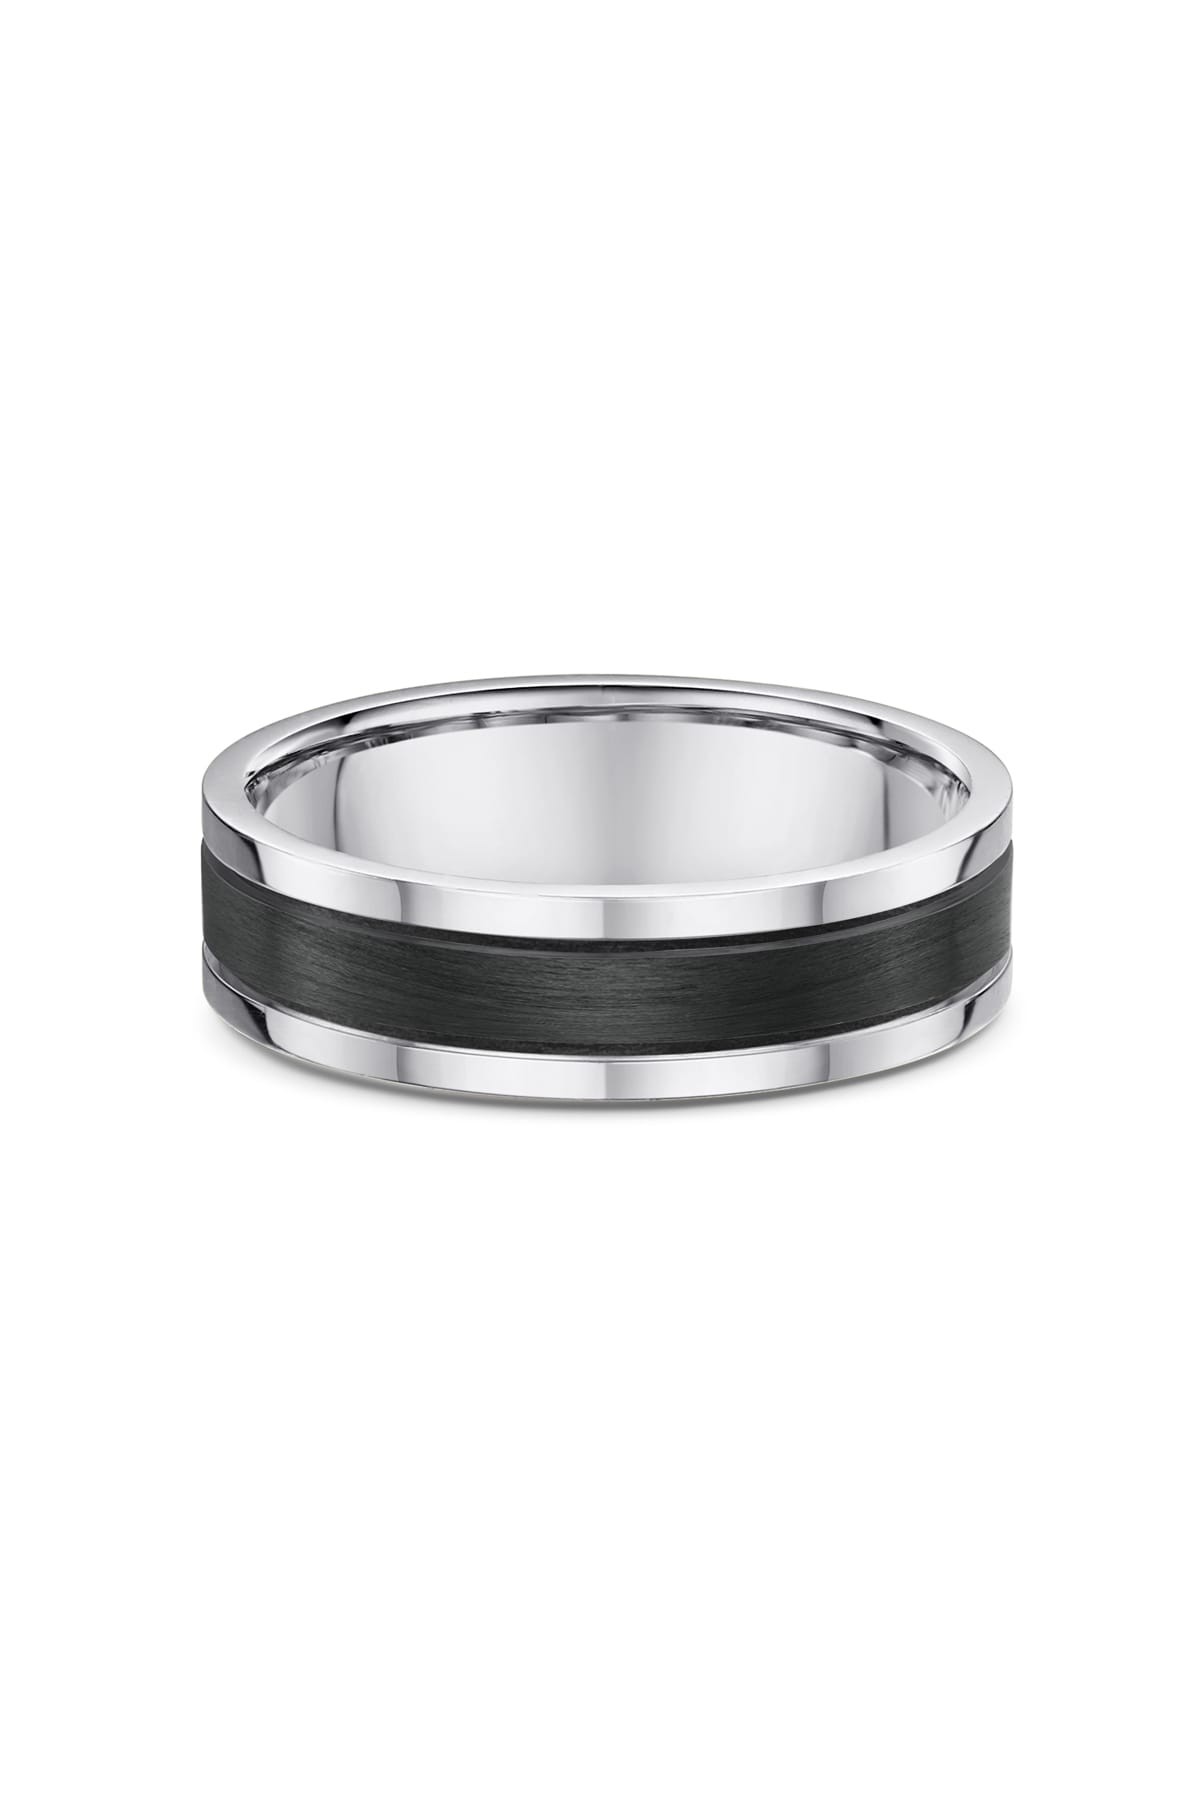 Men's Wedding Ring in White Gold available at LeGassick Diamonds and Jewellery Gold Coast, Australia.